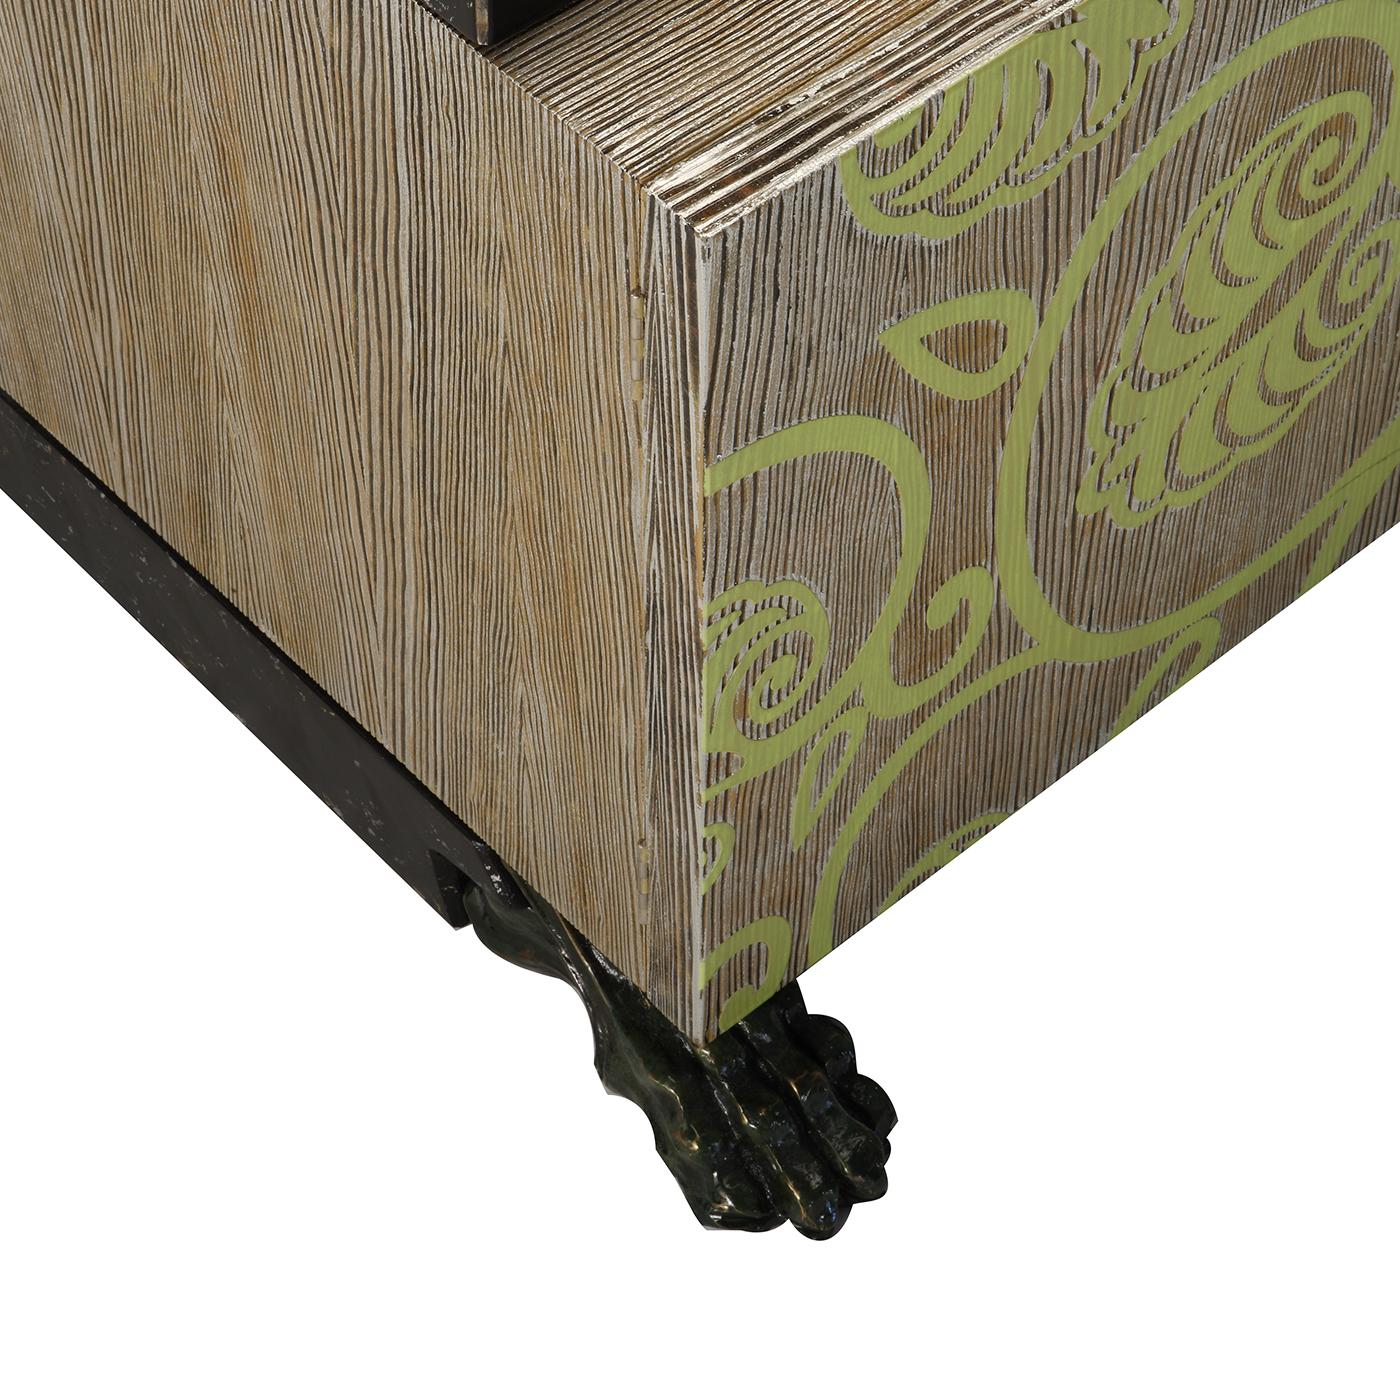 This unique sideboard is an ideal complement to an eclectic interior, where it will add a pop of color and dynamic decoration, while also providing storage space in a modern dining room. The wooden structure rests on four clawfoot bronze feet which